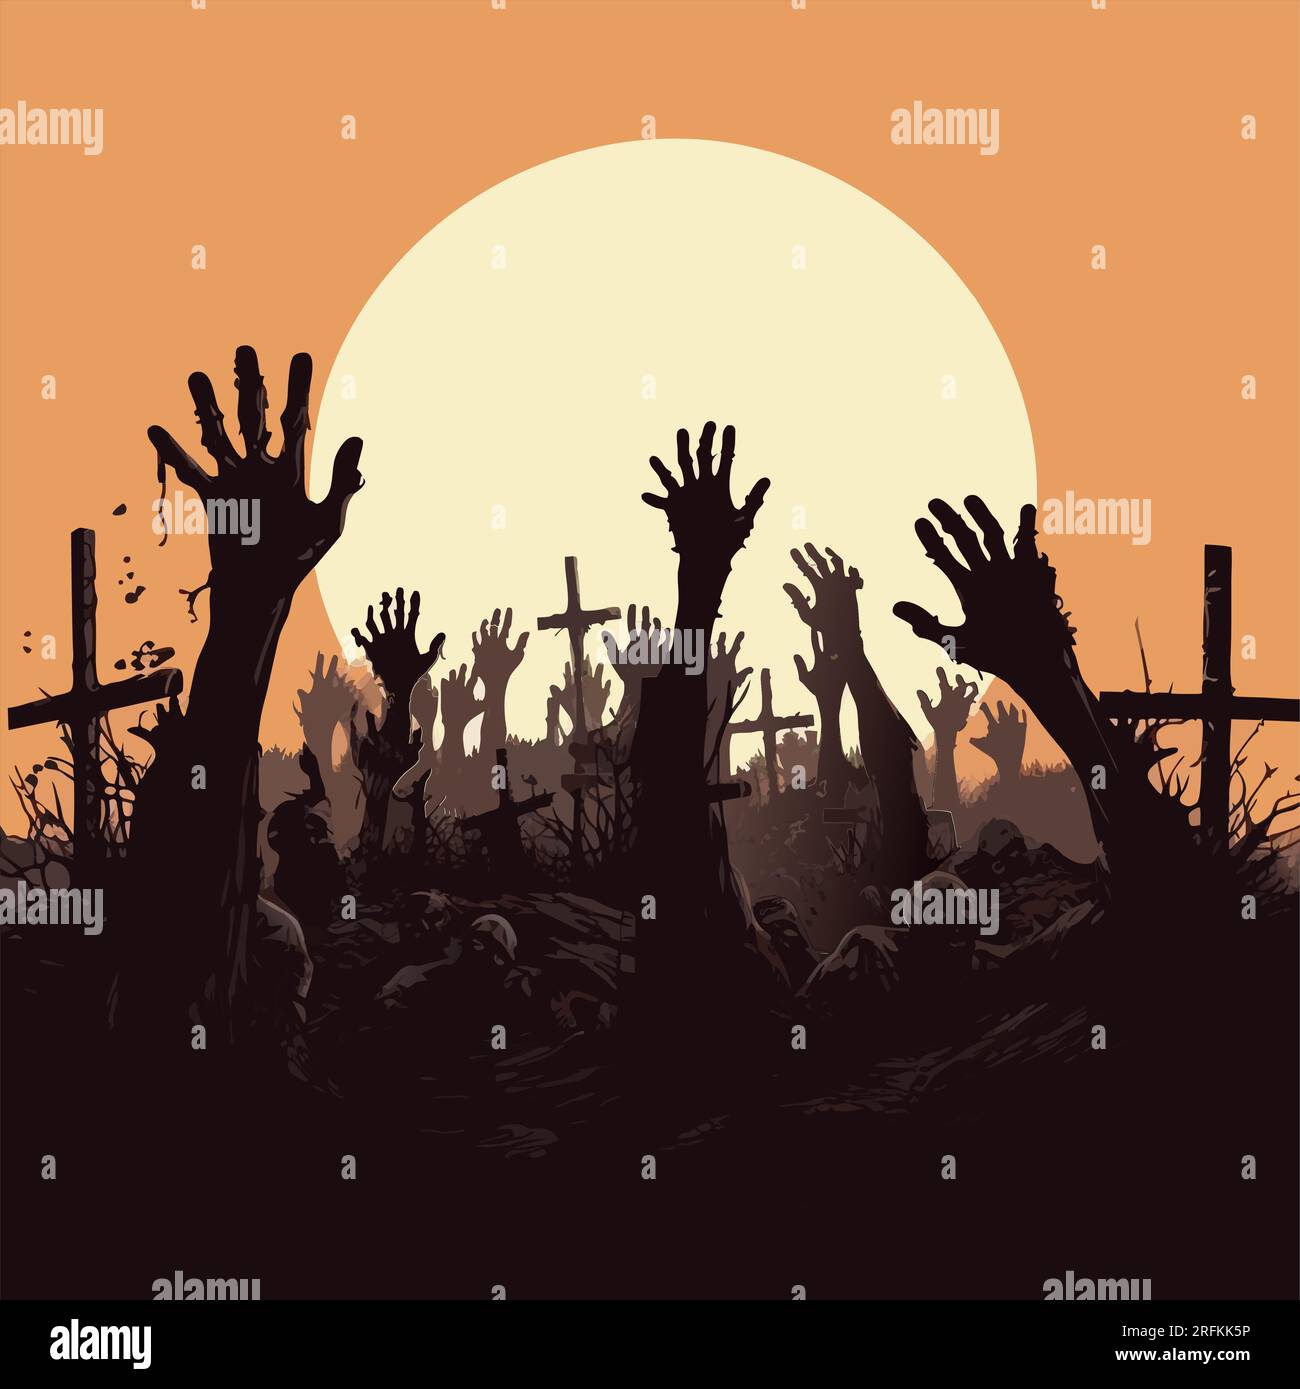 Zombie hands silhouette. Creepy zombie crooked lambs stick out of ...